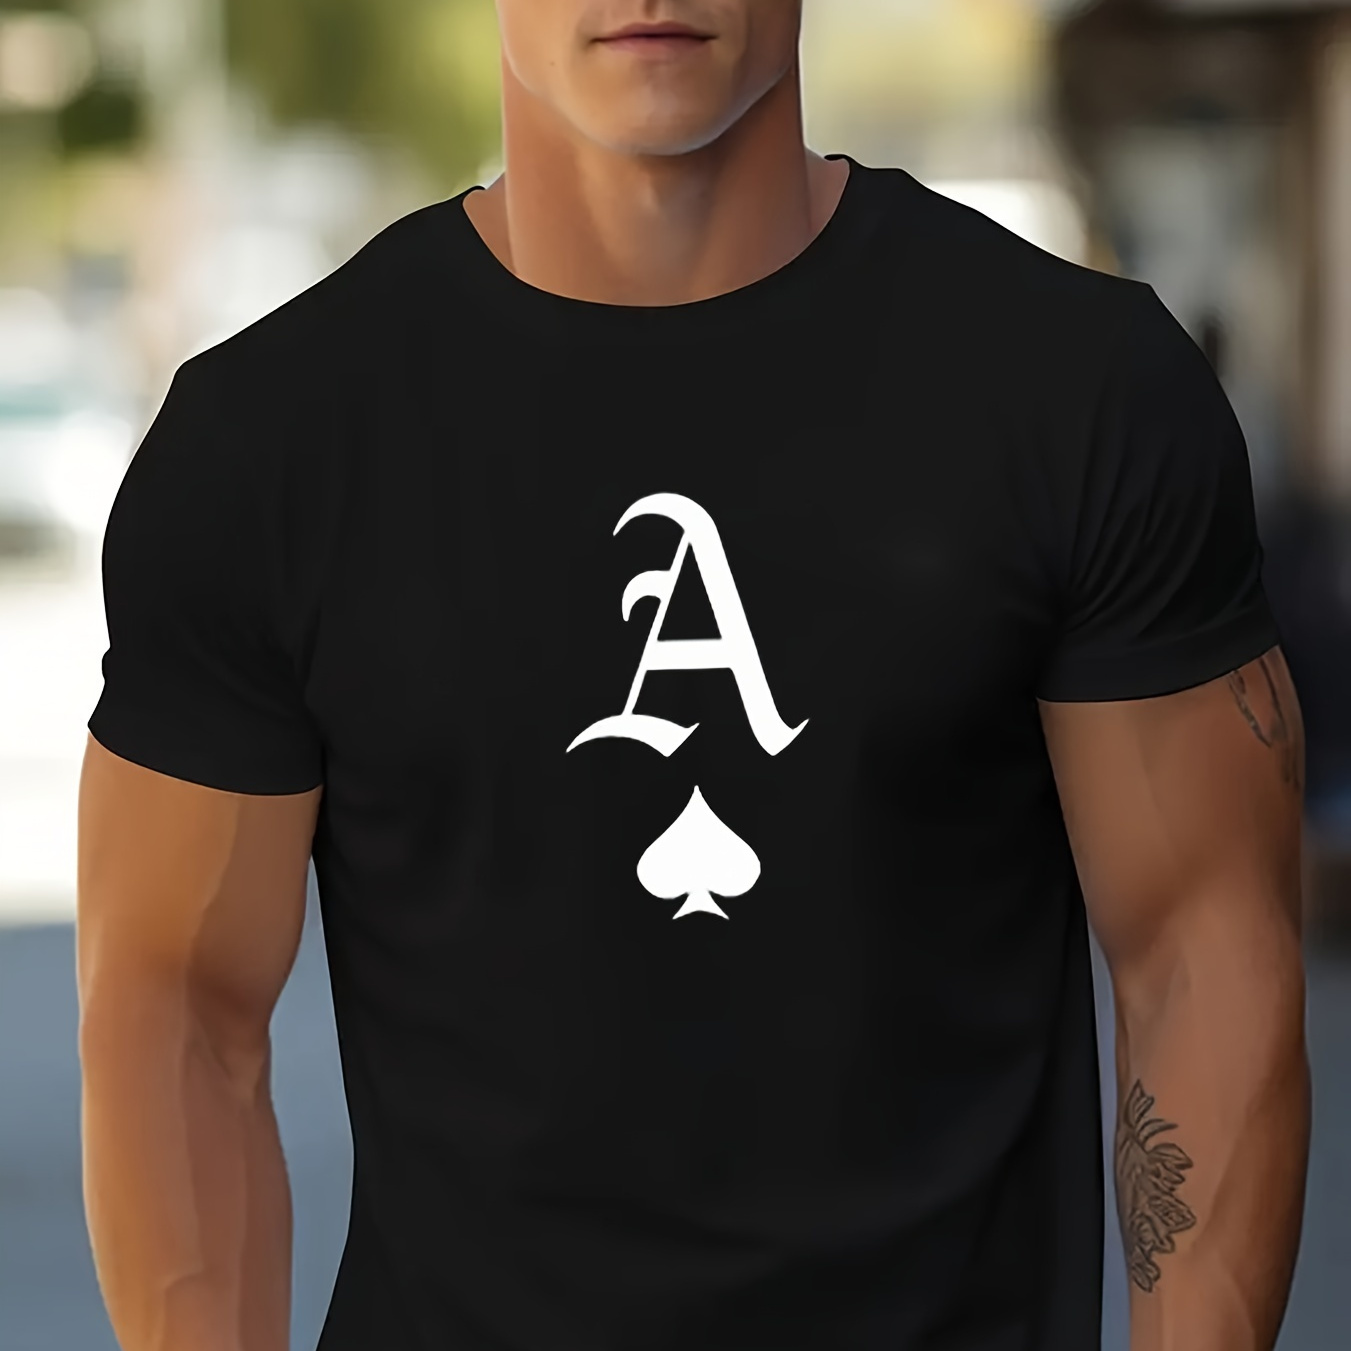 

Men's Casual Cotton Short Sleeve, Stylish T-shirt With Ace Of Spades Creative Print, Summer Fashion Top, Crew Neck Tee-shirt For Male